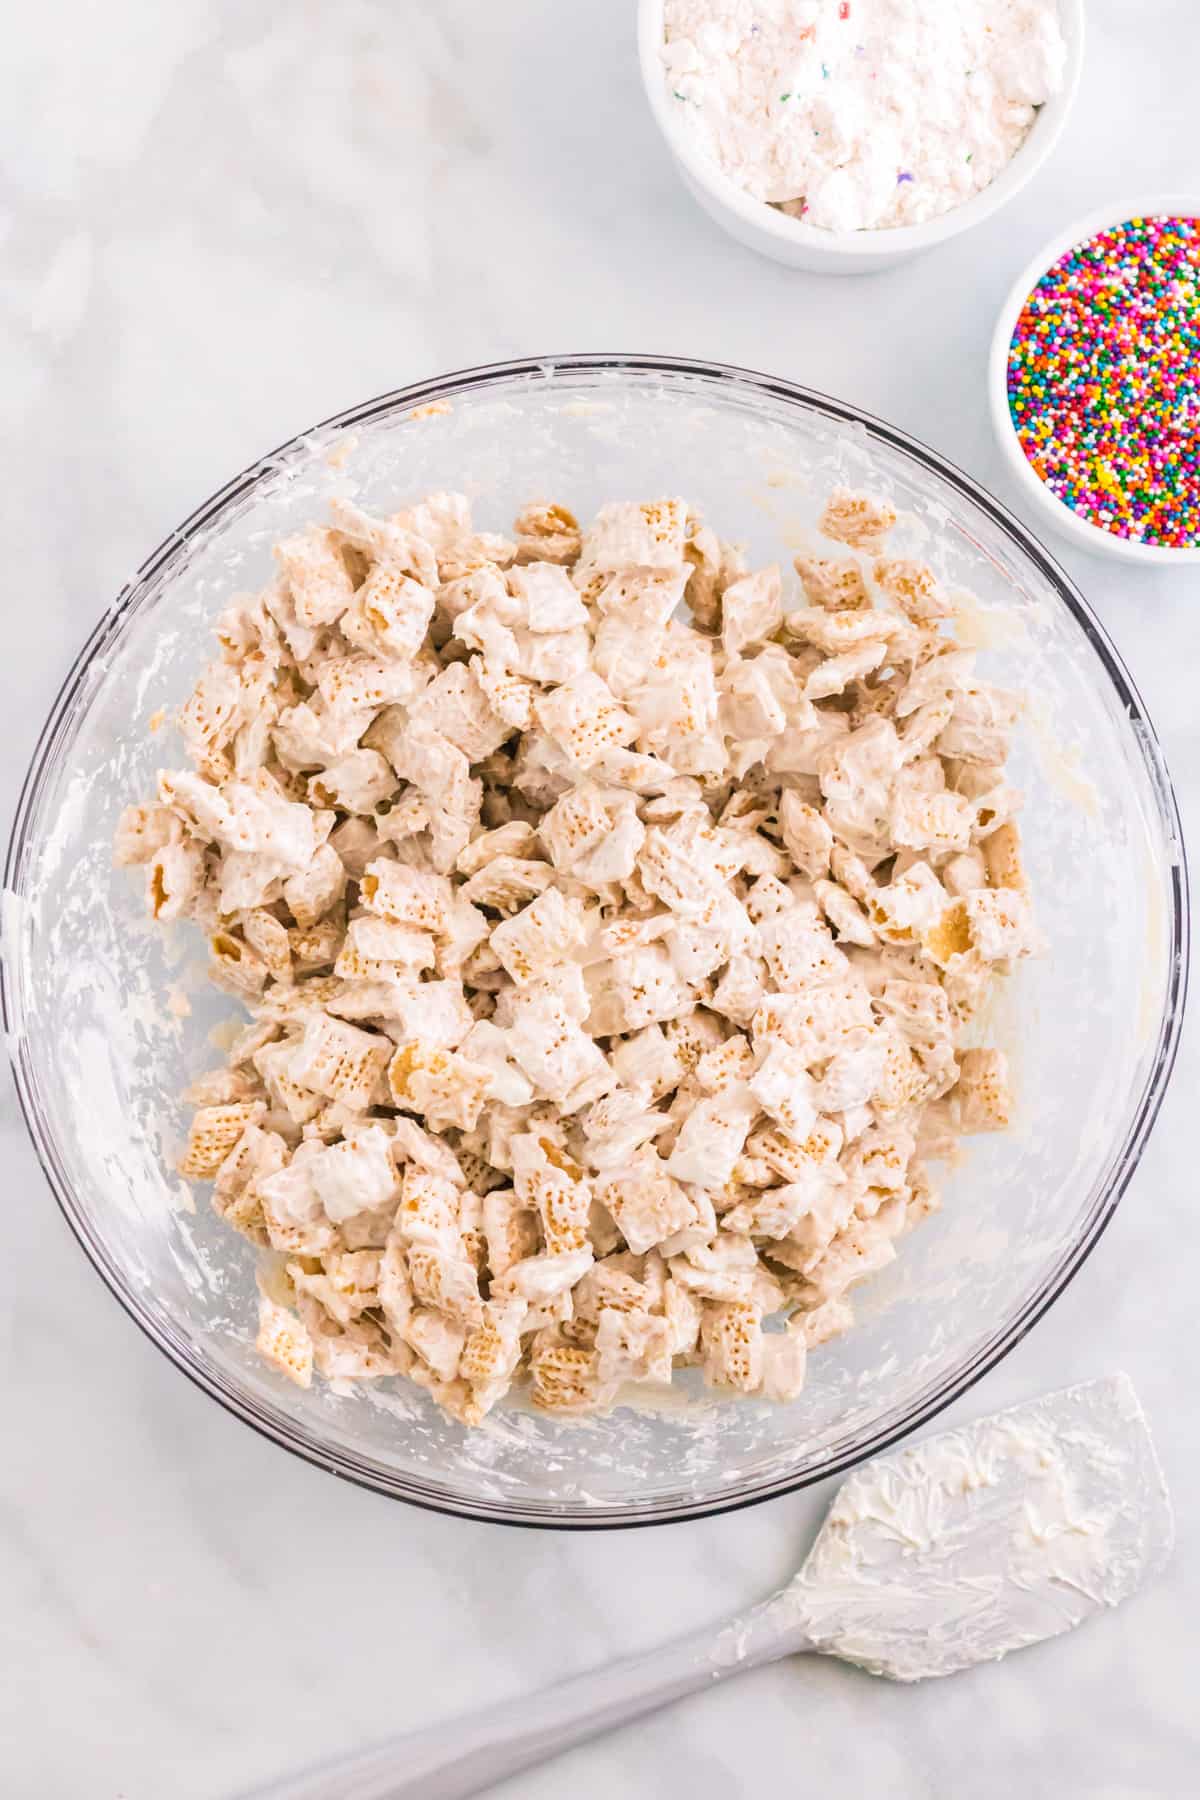 White candy melt coated chex cereal in large glass bowl with rainbow sprinkles, spatula, and funfetti cake mix beside it